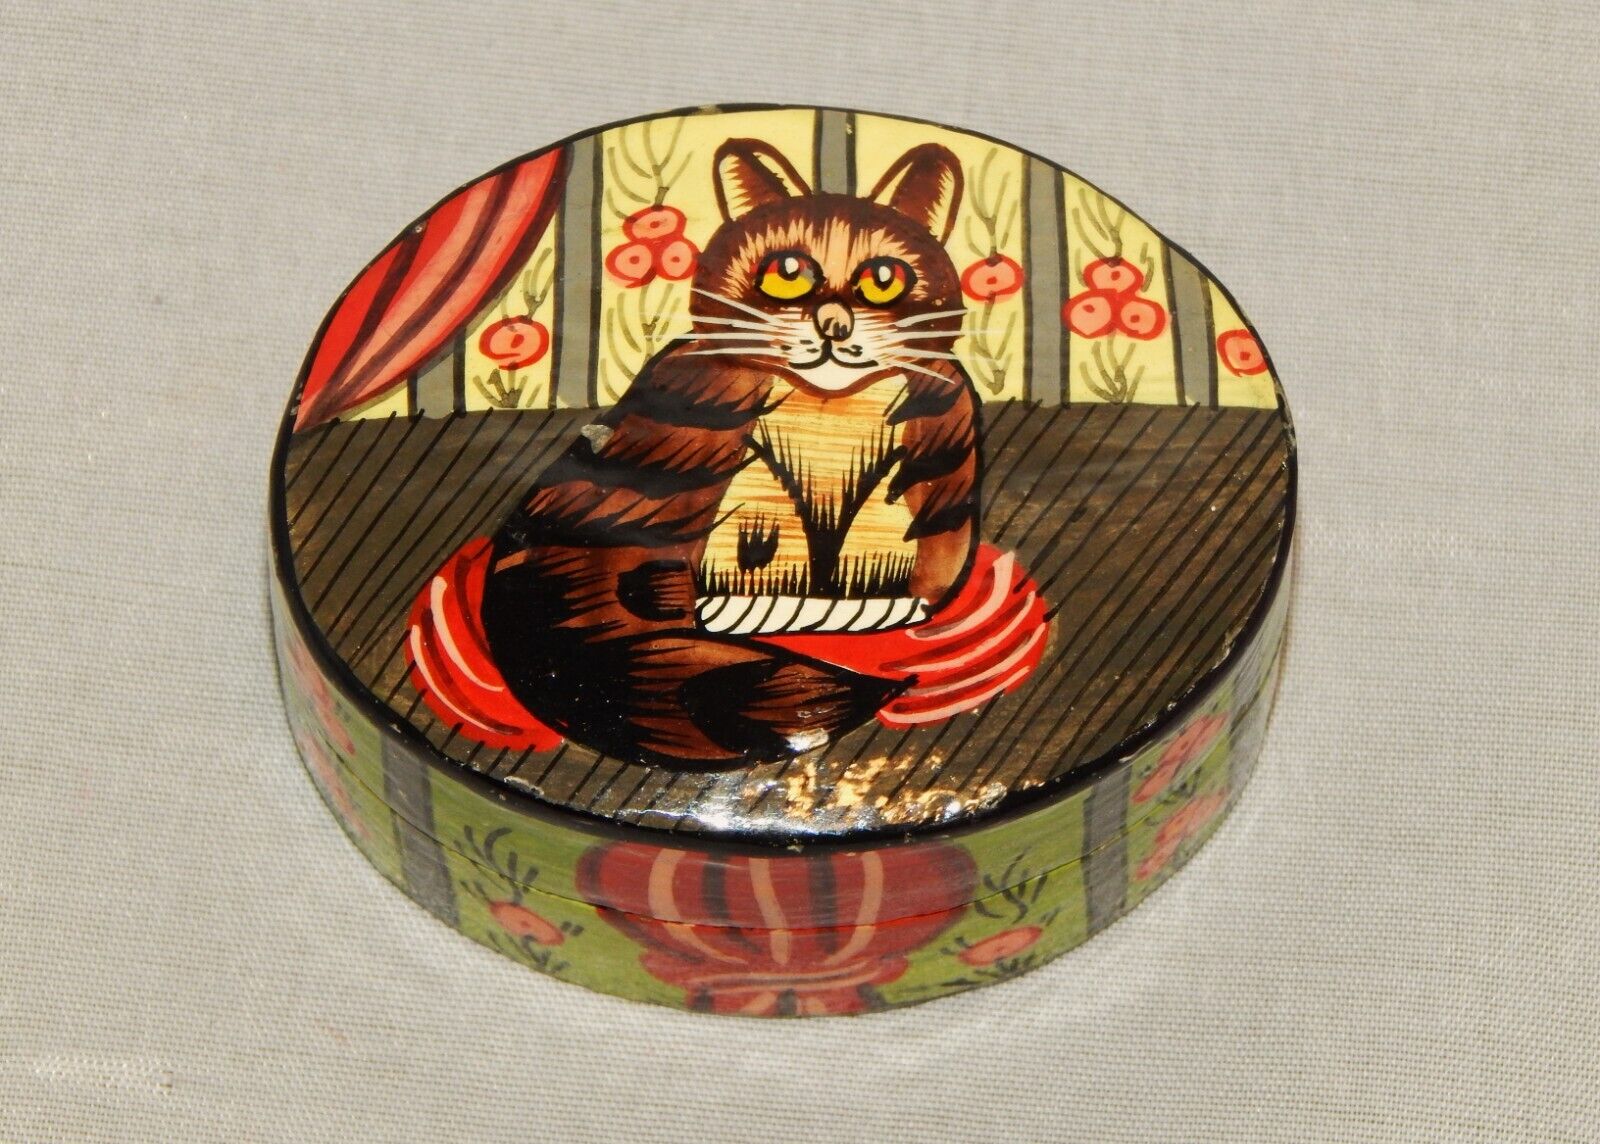 Kashmir India Small Painted Covered Box Cat Design